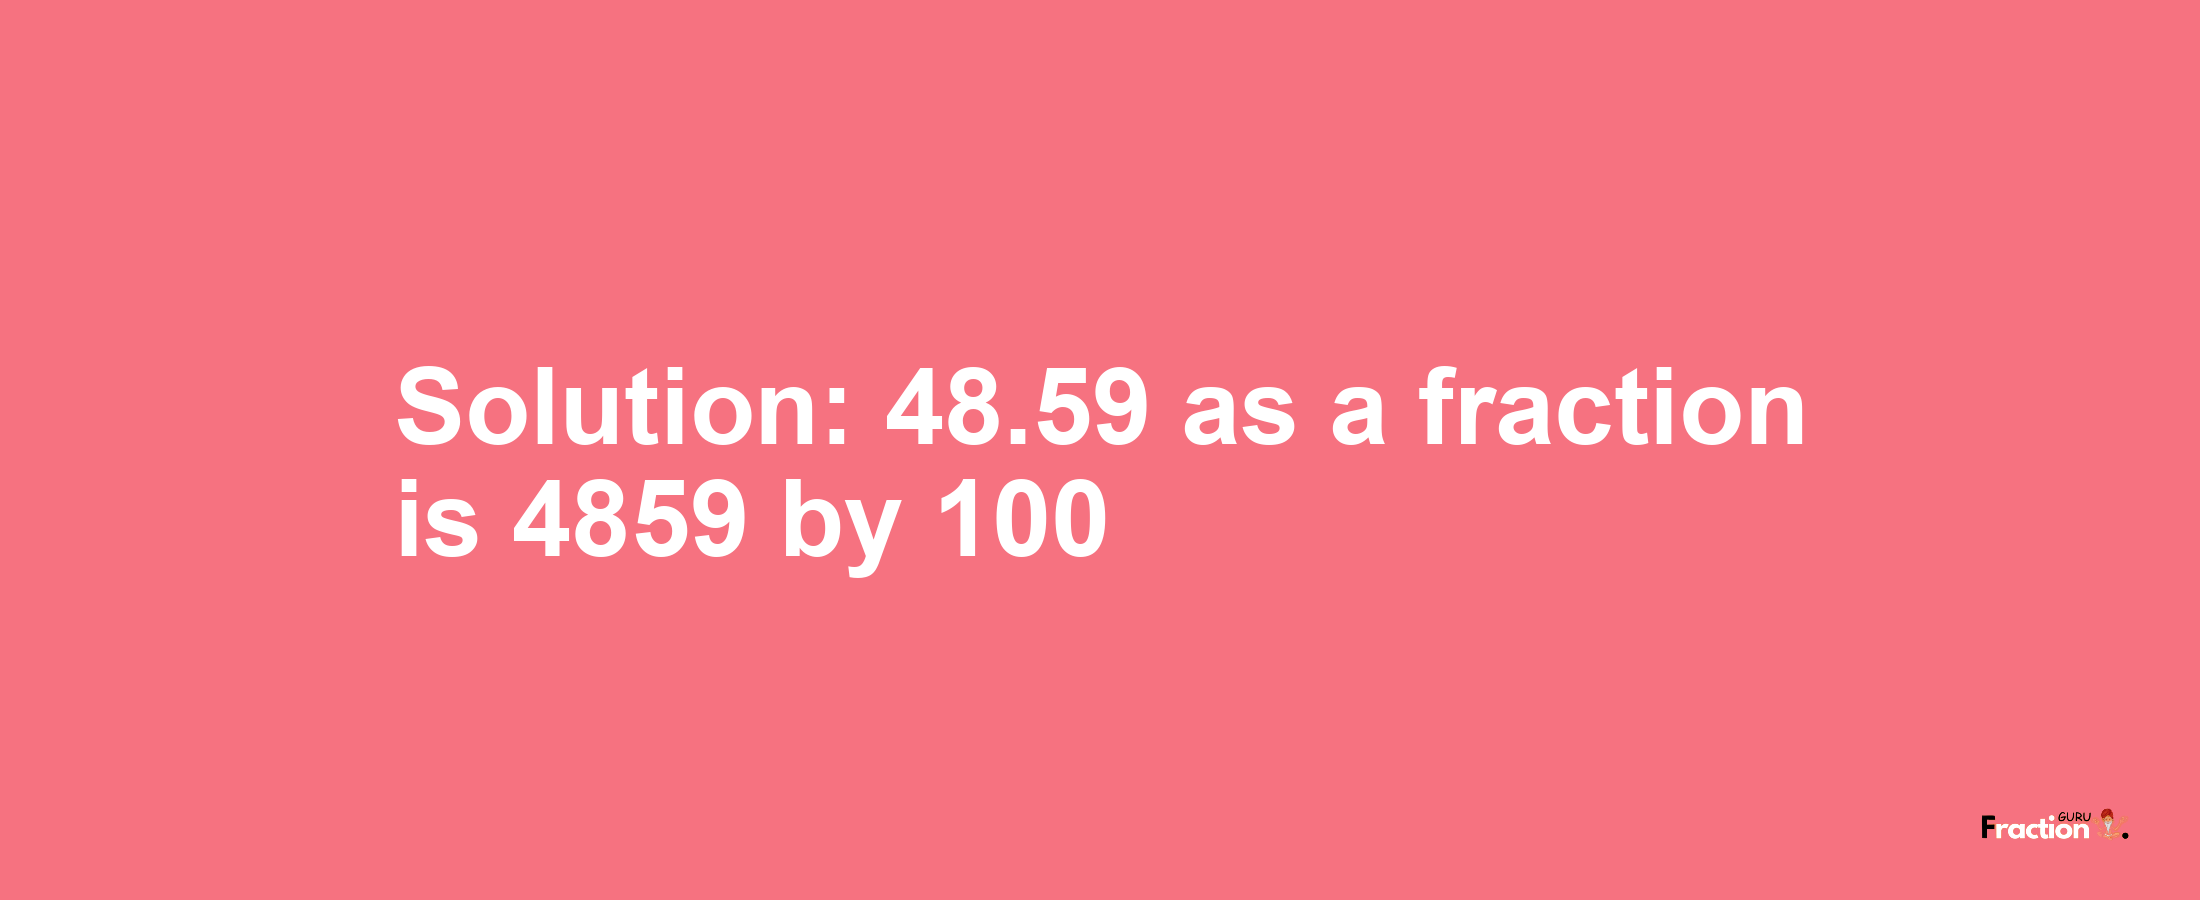 Solution:48.59 as a fraction is 4859/100